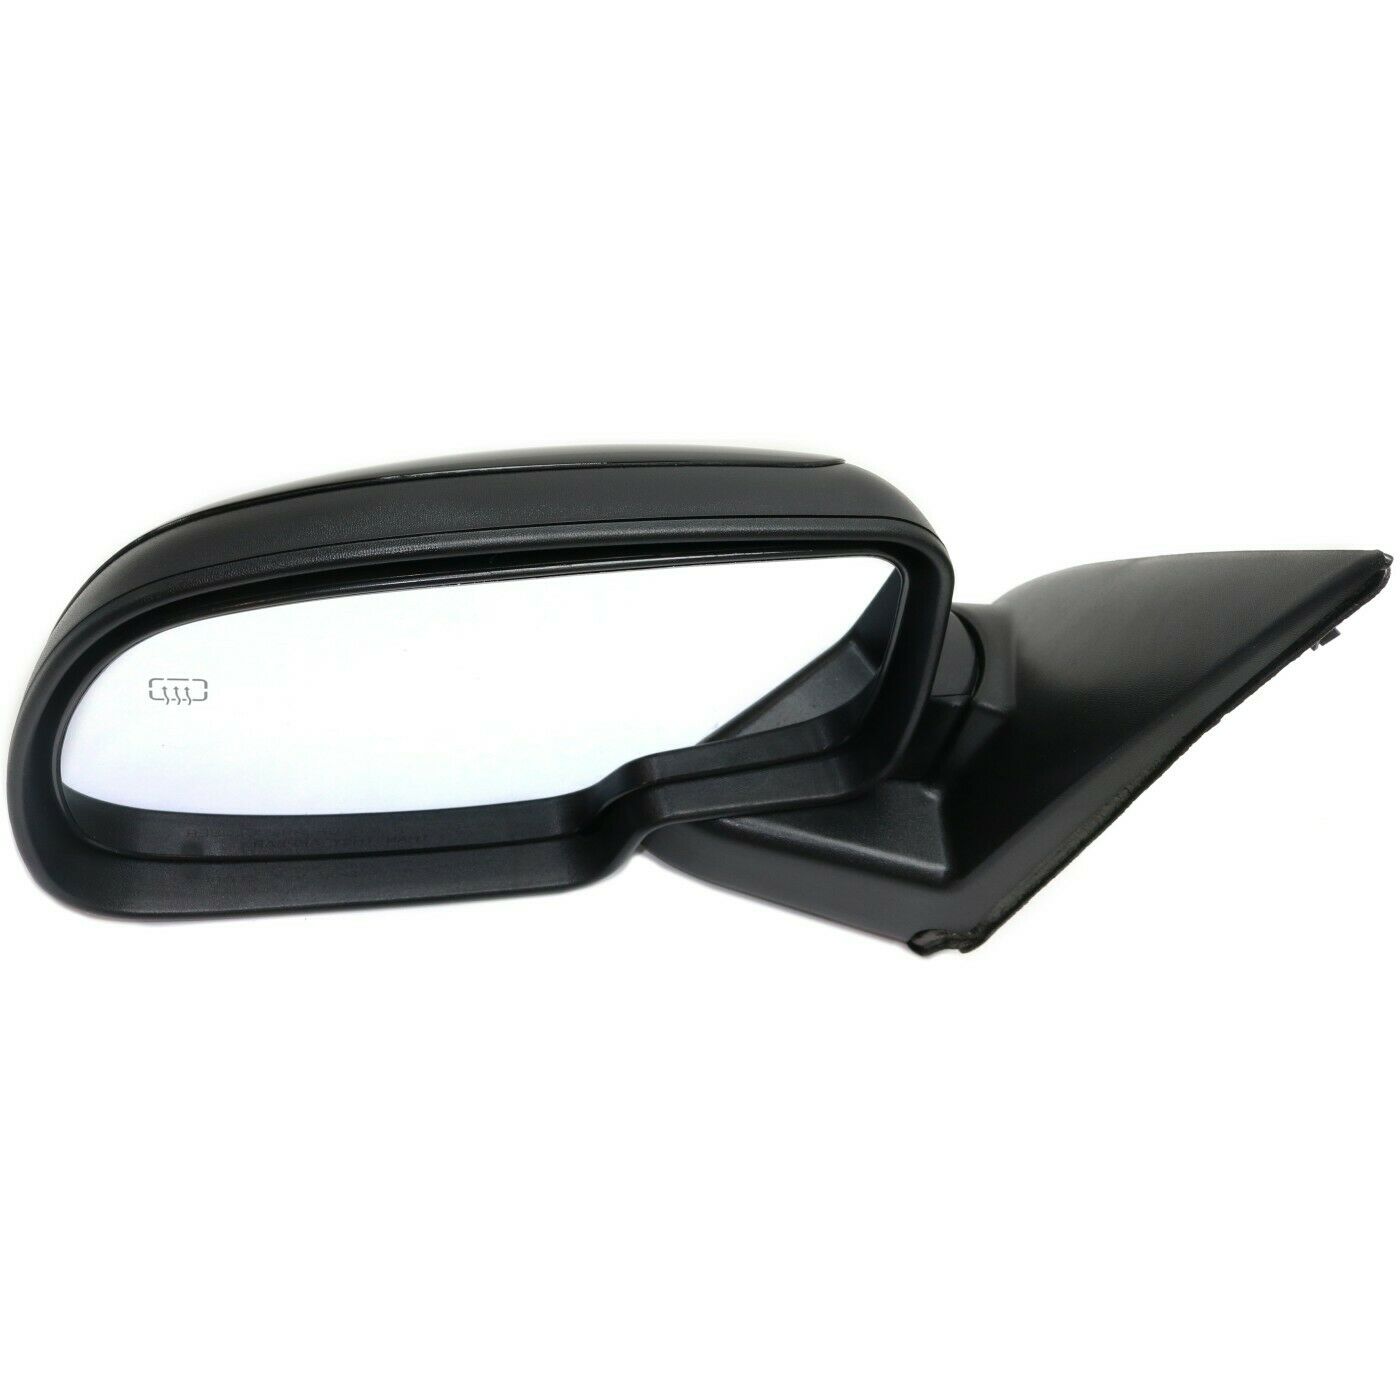 Power Driver Left Side Mirror For 2002-2006 Chevrolet Avalanche 1500 Tahoe | eBay 2002 Chevy Tahoe Driver Side Mirror Replacement